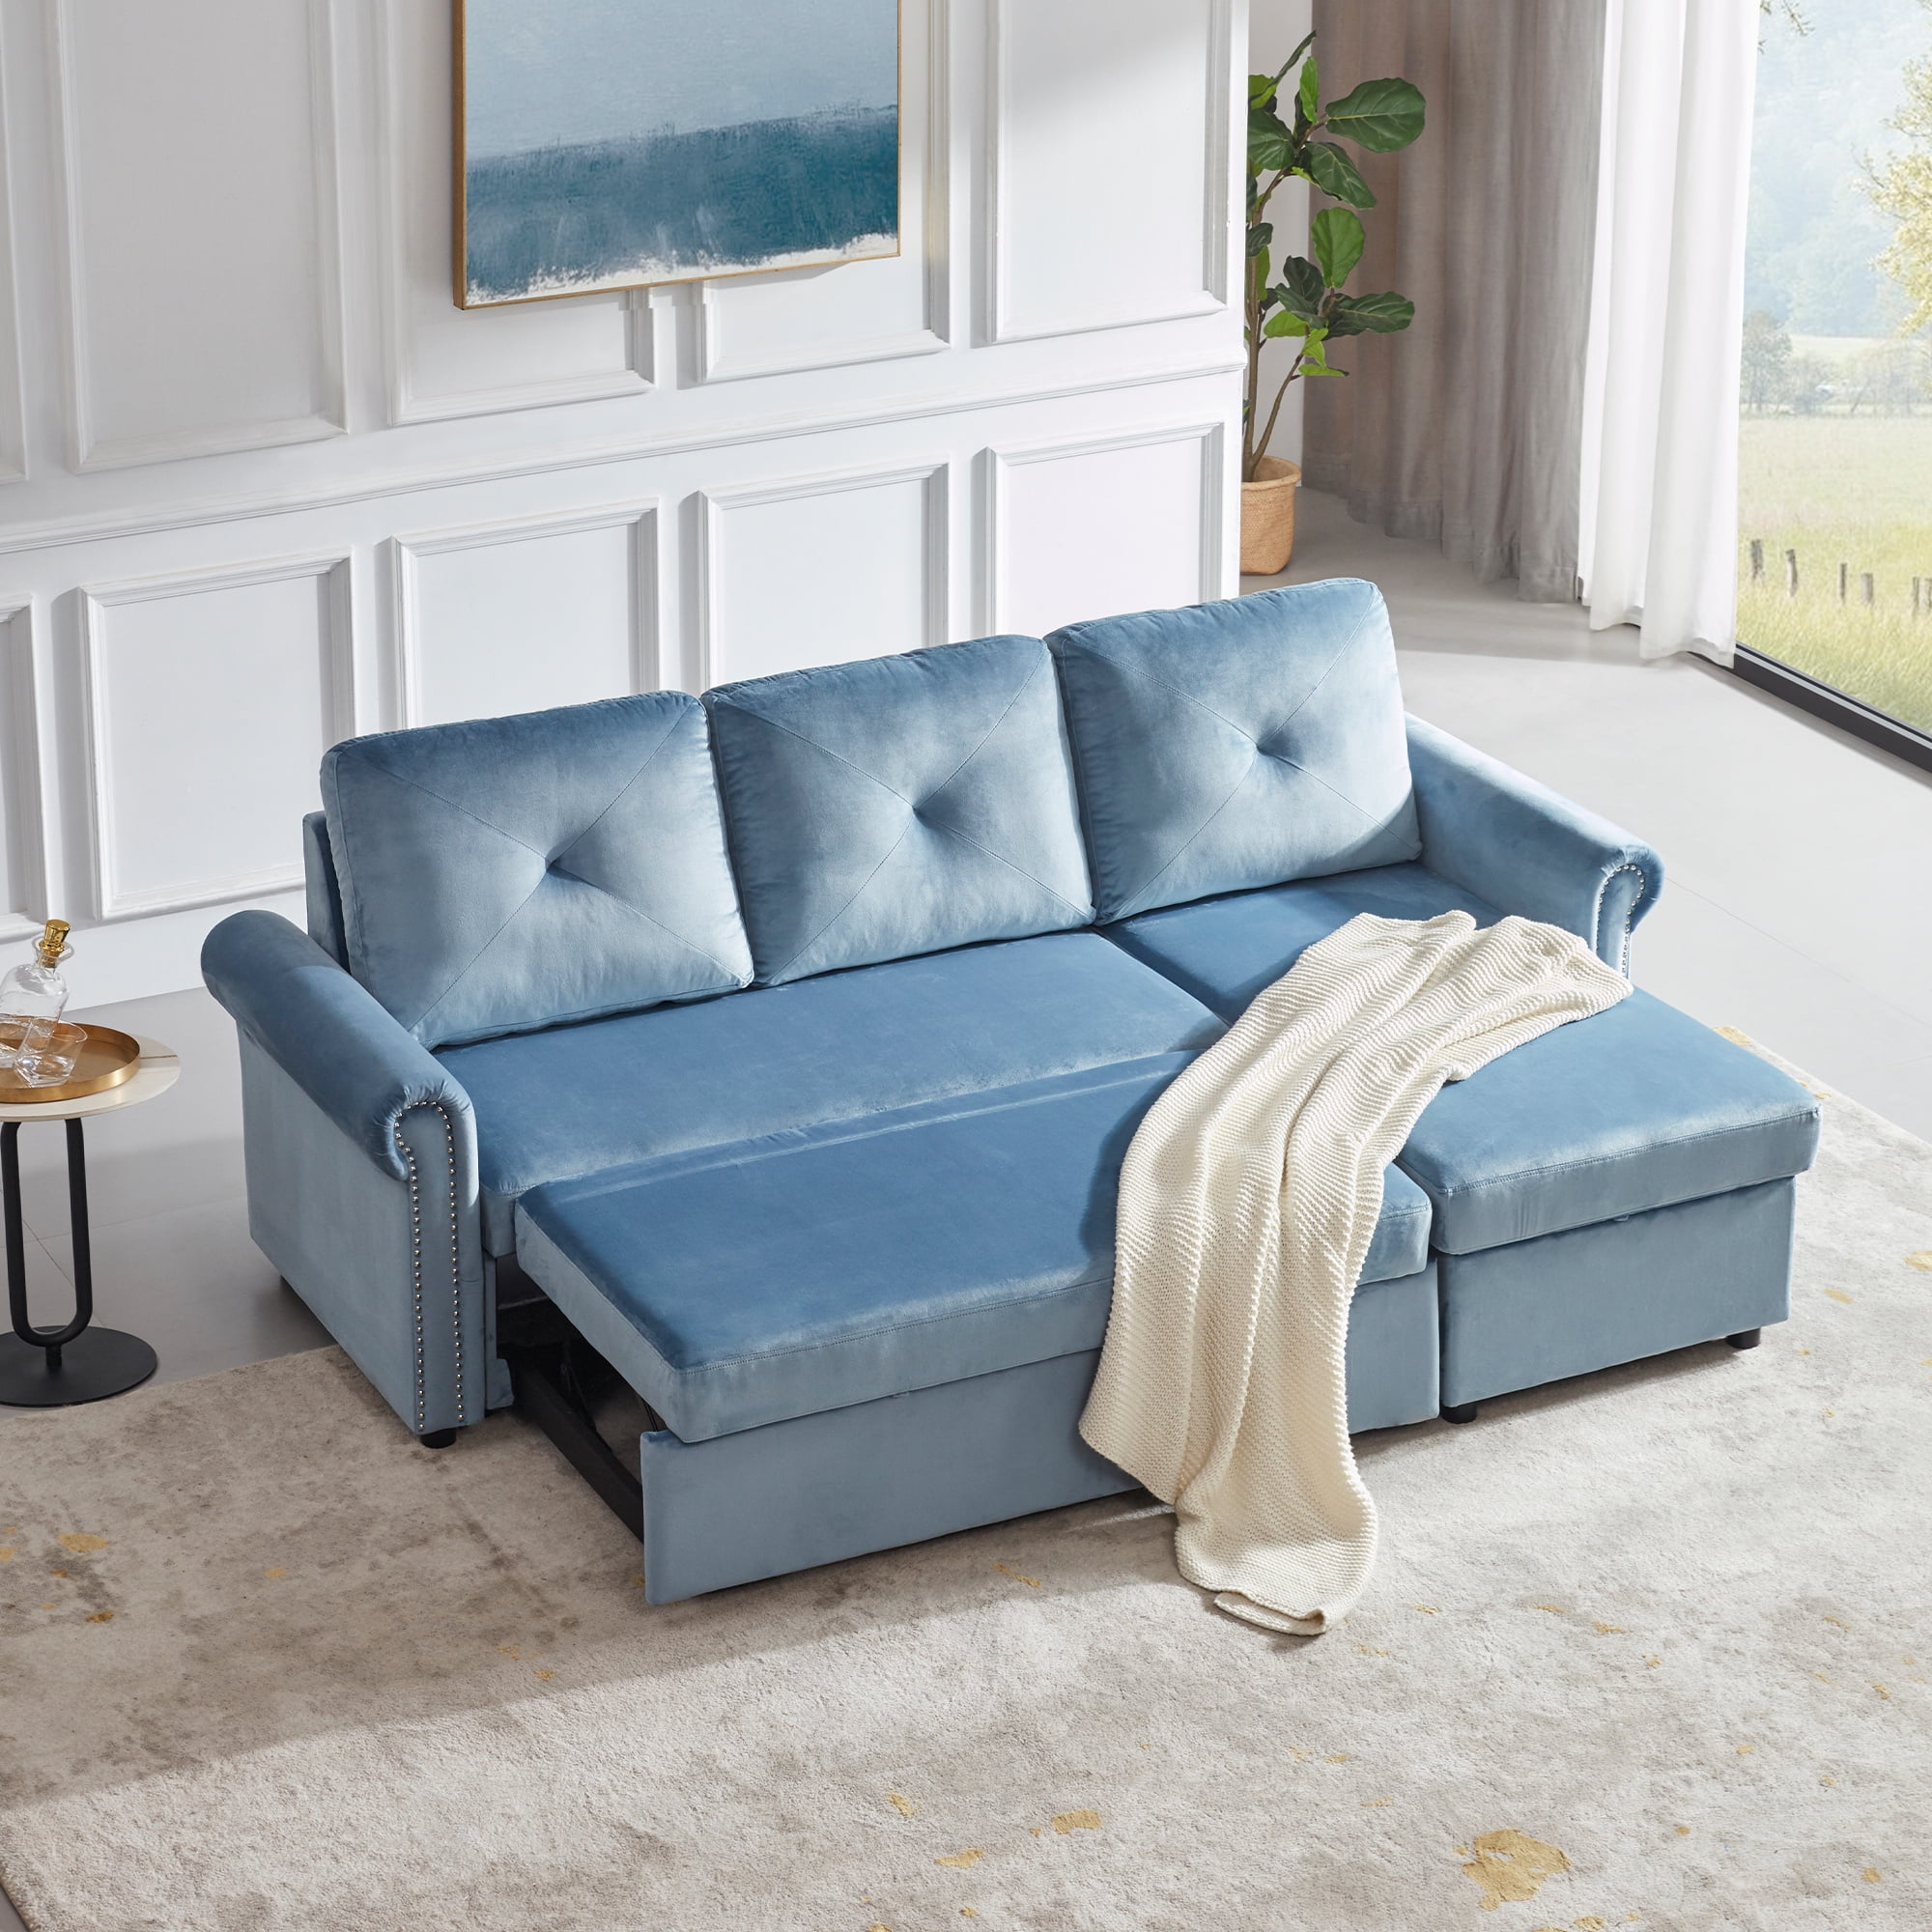 Sectional Sleeper Sofa Couch With Pull, Sectional Sofa Bed With Storage Convertible Chaise